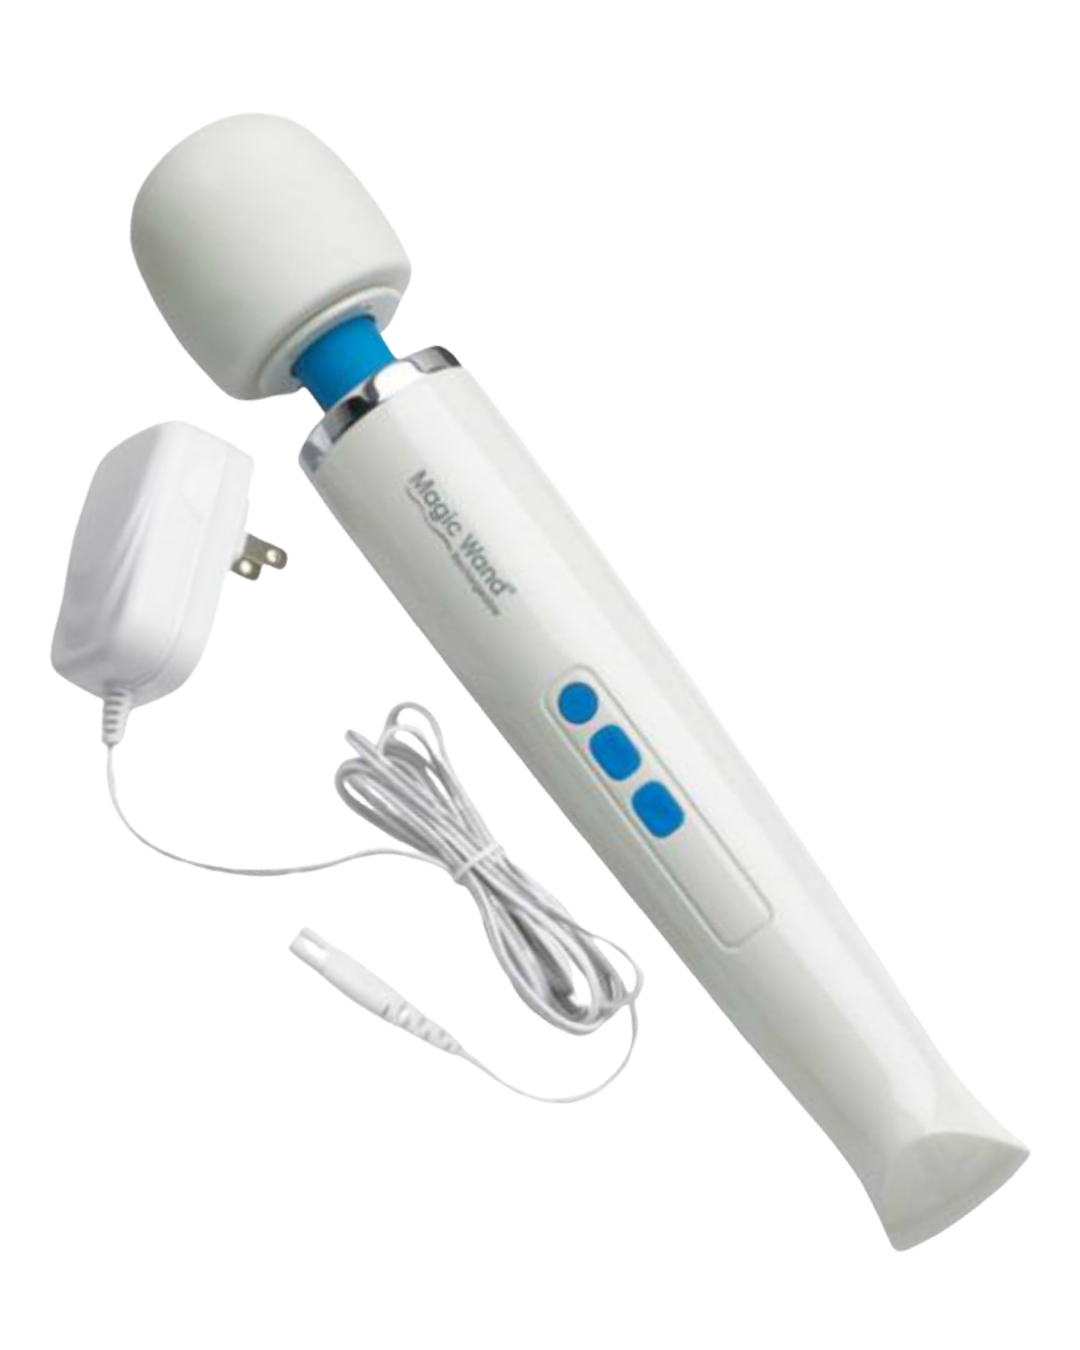 Magic Wand Unplugged Rechargeable Massager against a white background with a view of the wand and cord